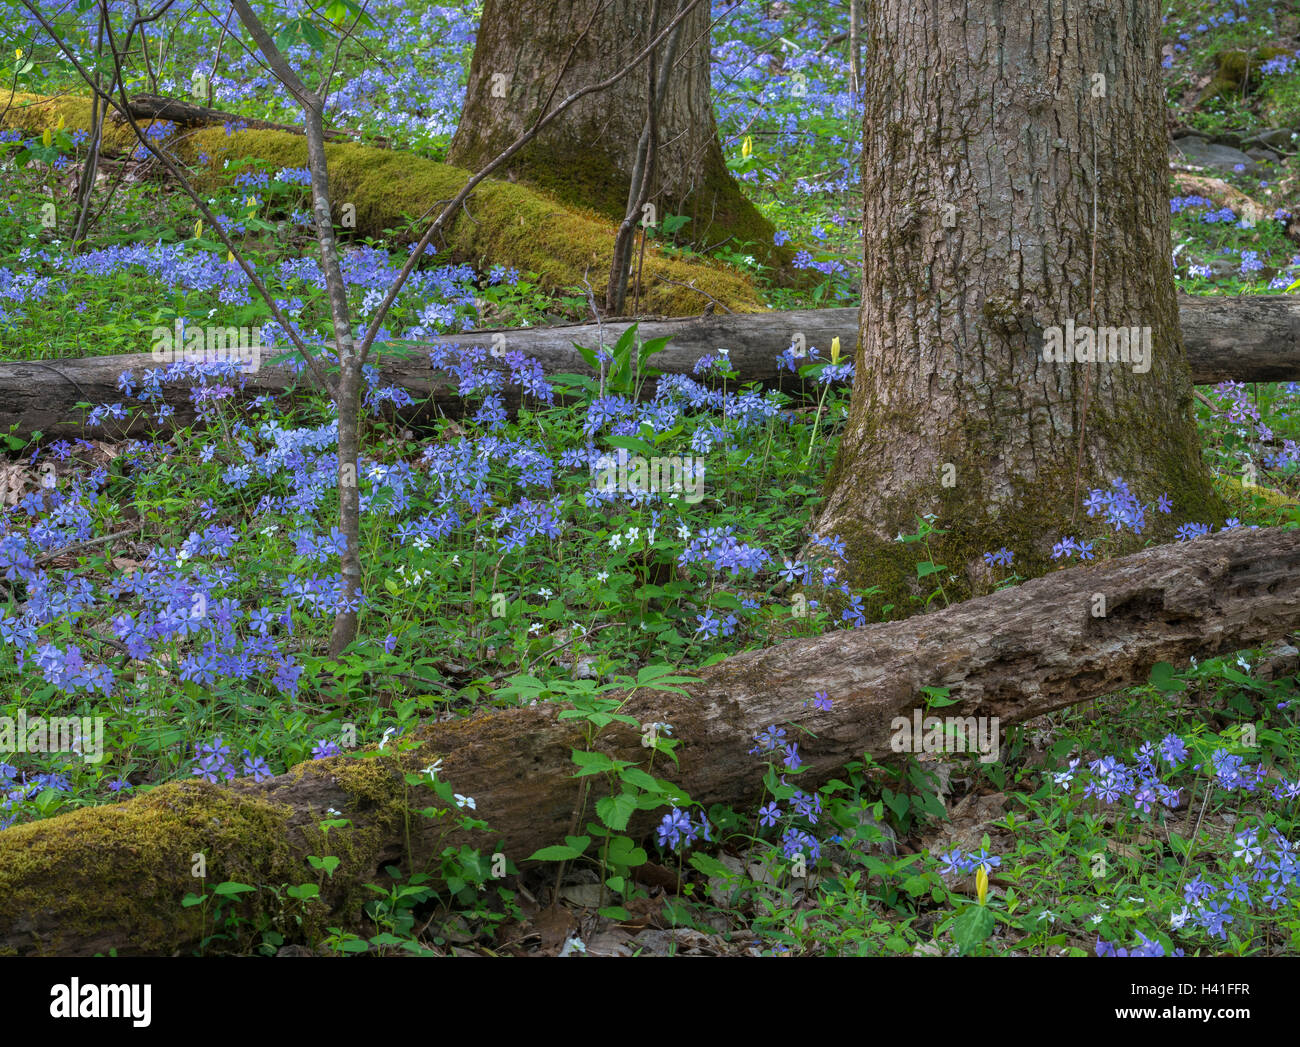 Great Smoky Mountains National Park, Tennessee: Wild blue phlox (Phlox divaricata) blooming under a forest understory Stock Photo